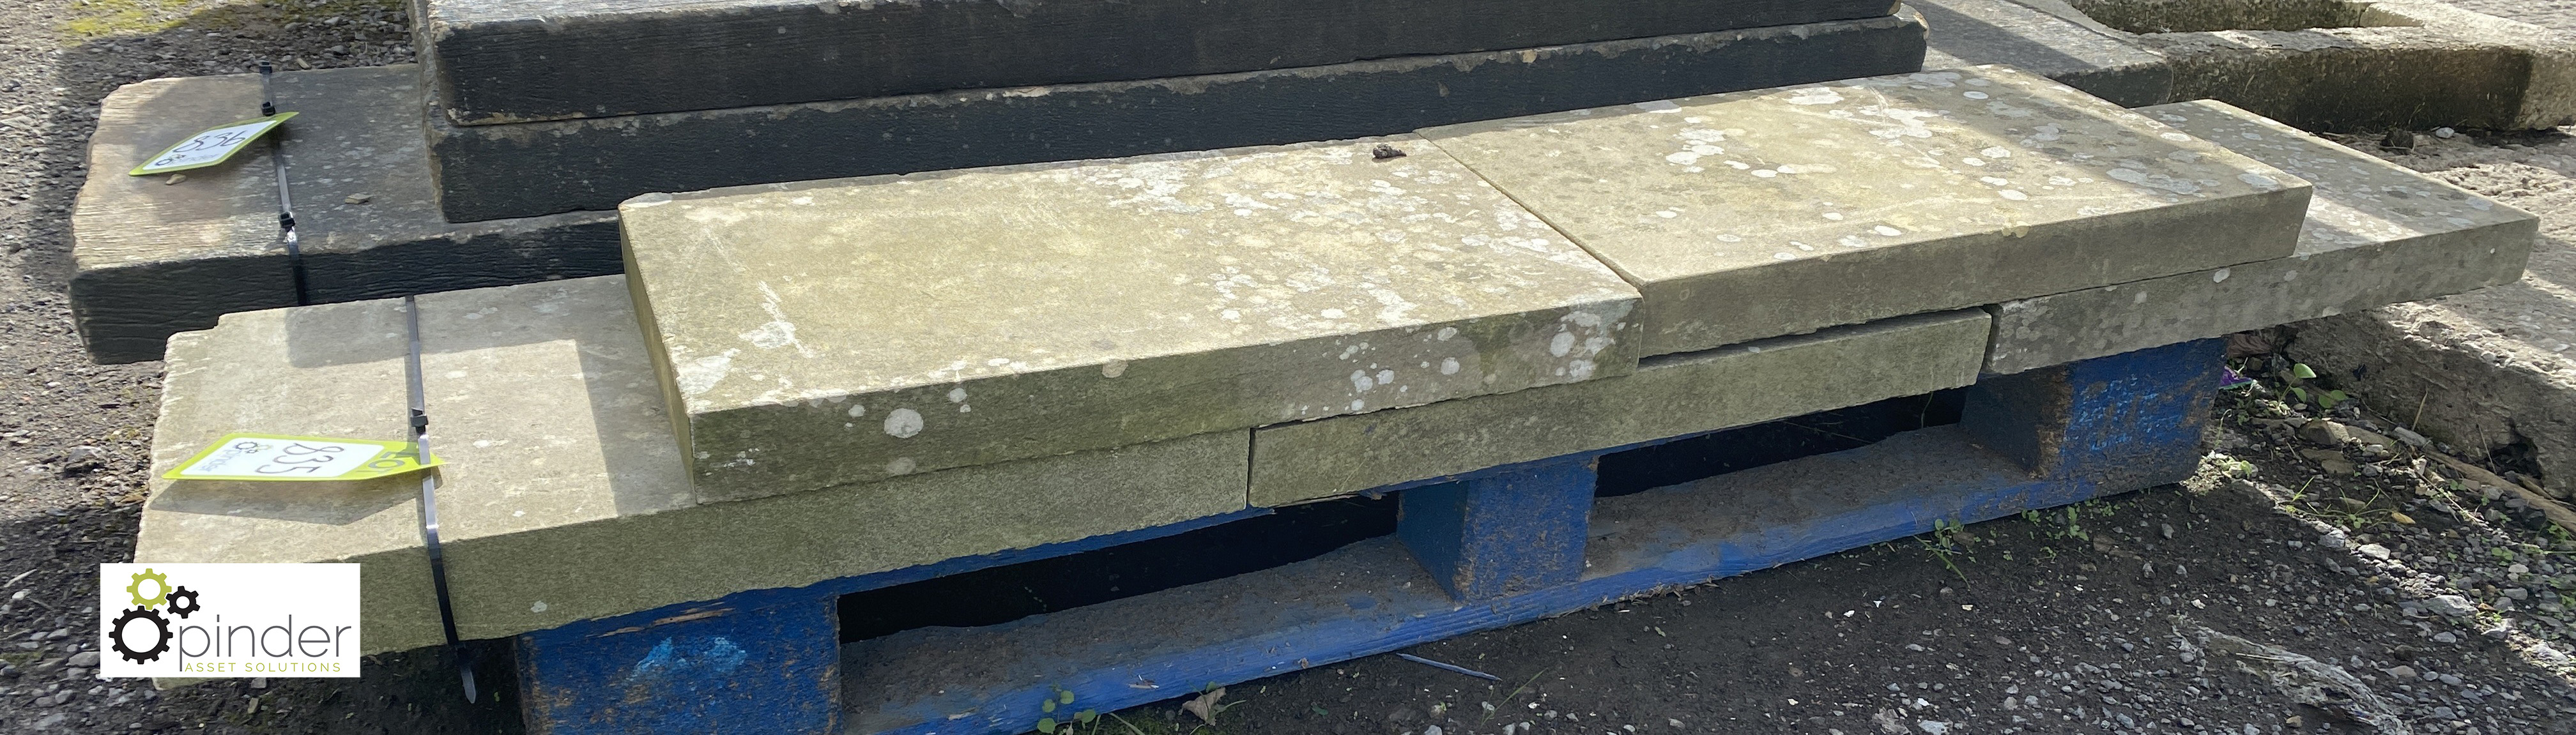 5 pieces Yorkshire Stone Coping, 2in high x 12in wide x approx. 8ft total length - Image 3 of 4